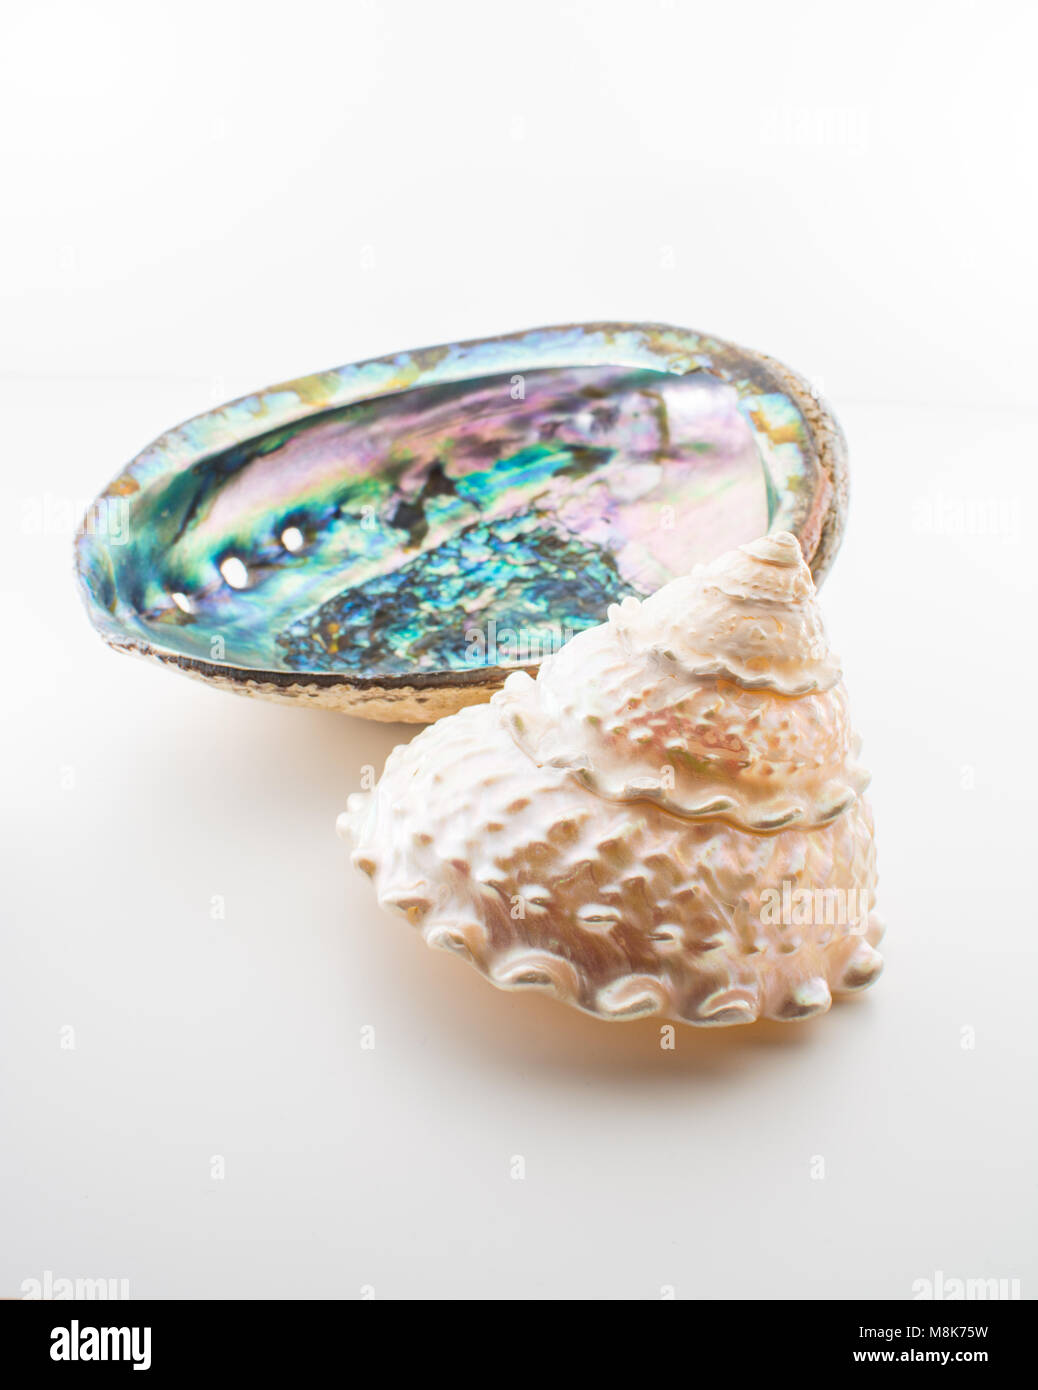 Beautiful tropical sea shells Haliotis discus abalone and pearl Trochus isolated, close up Stock Photo